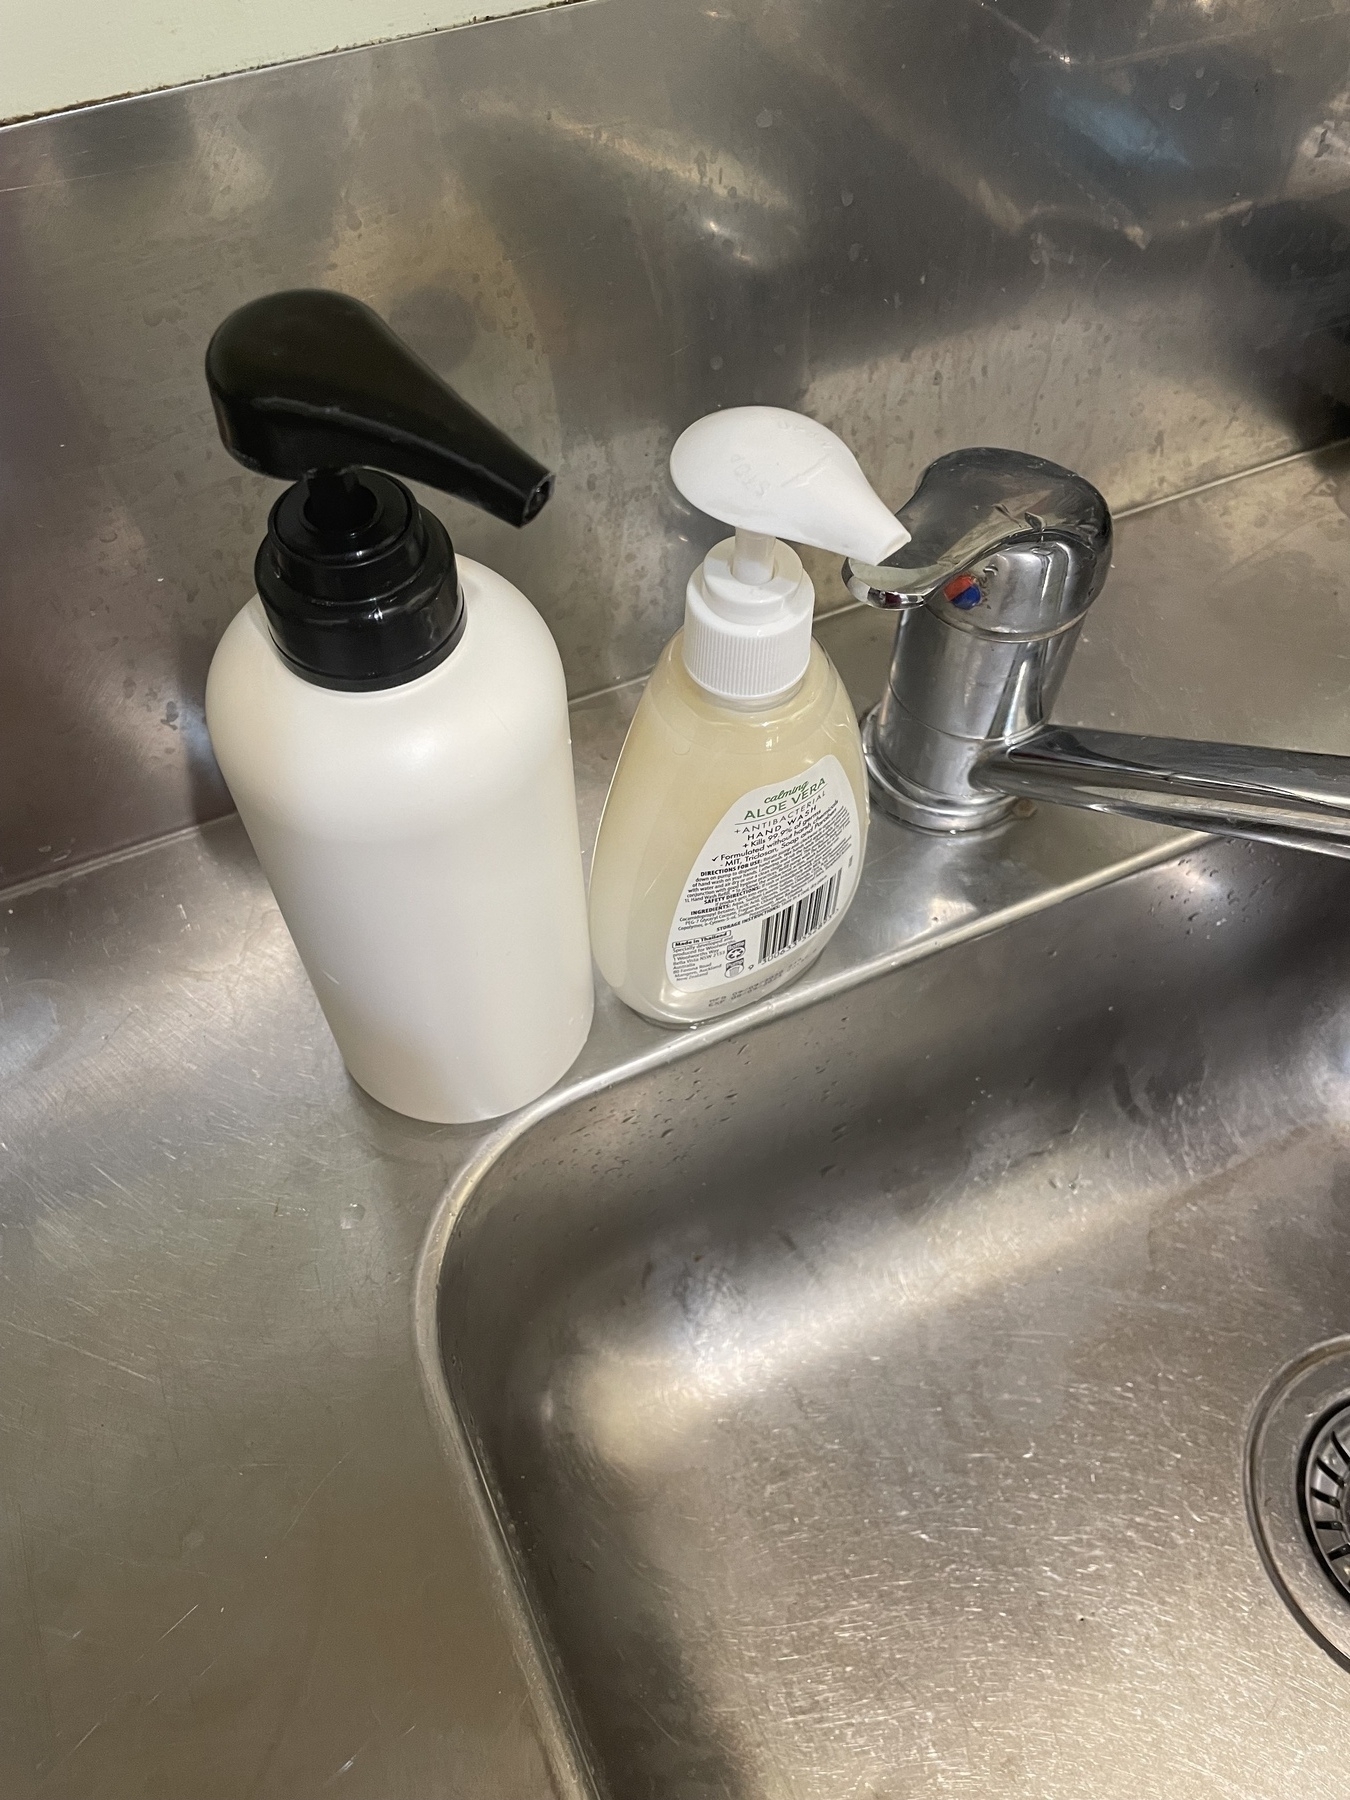 A small pump hand soap container containing hand soap. To its left, a large, white hand pump container containing dish liquid.